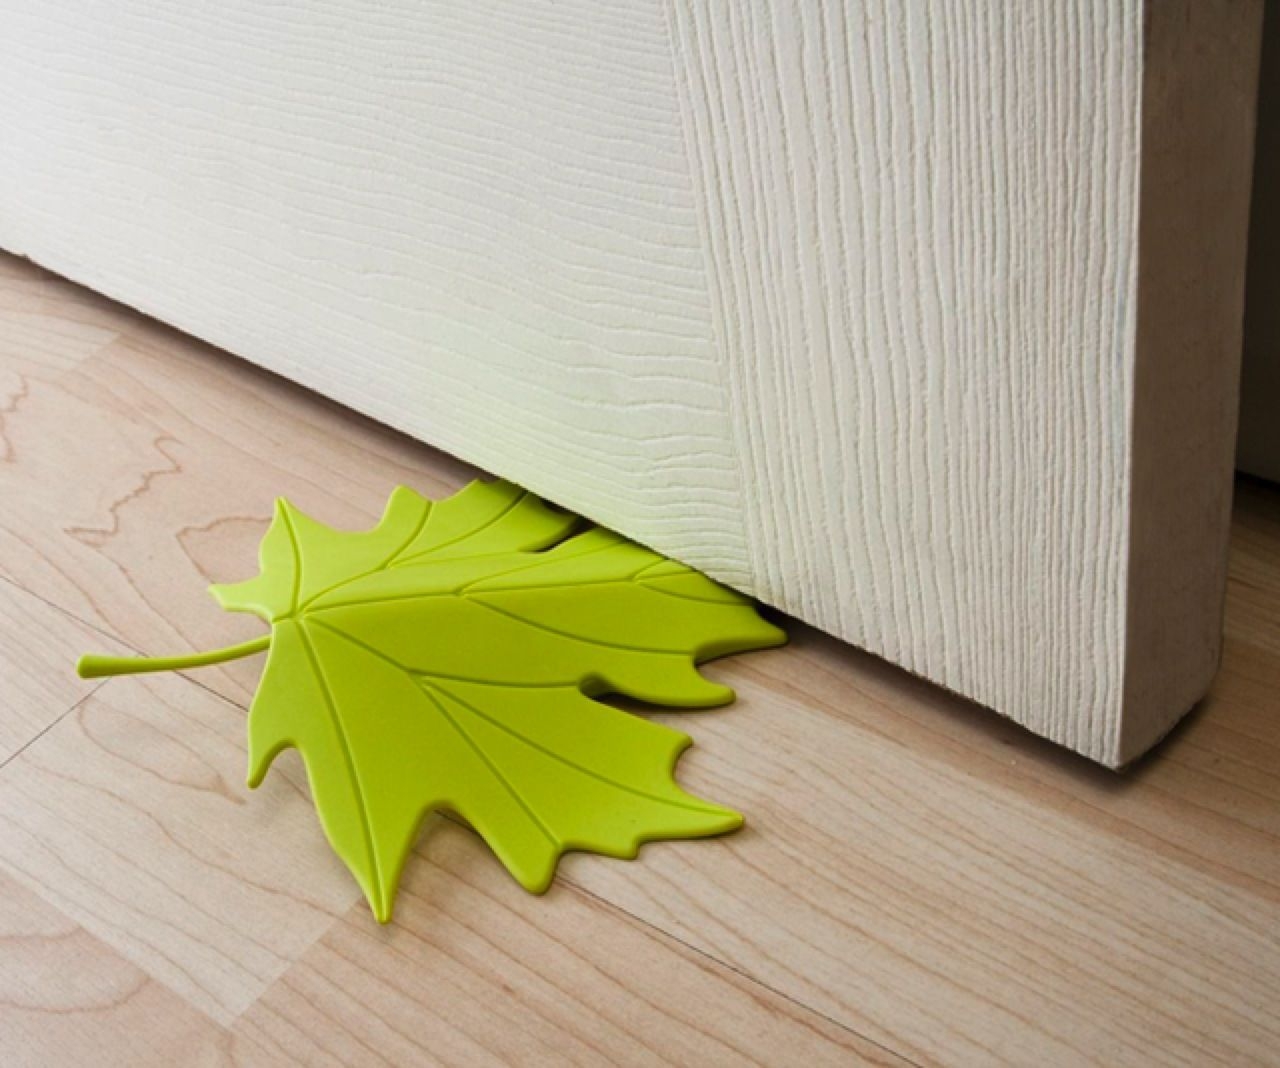 Leaf door stopper so cute better looking than those brown